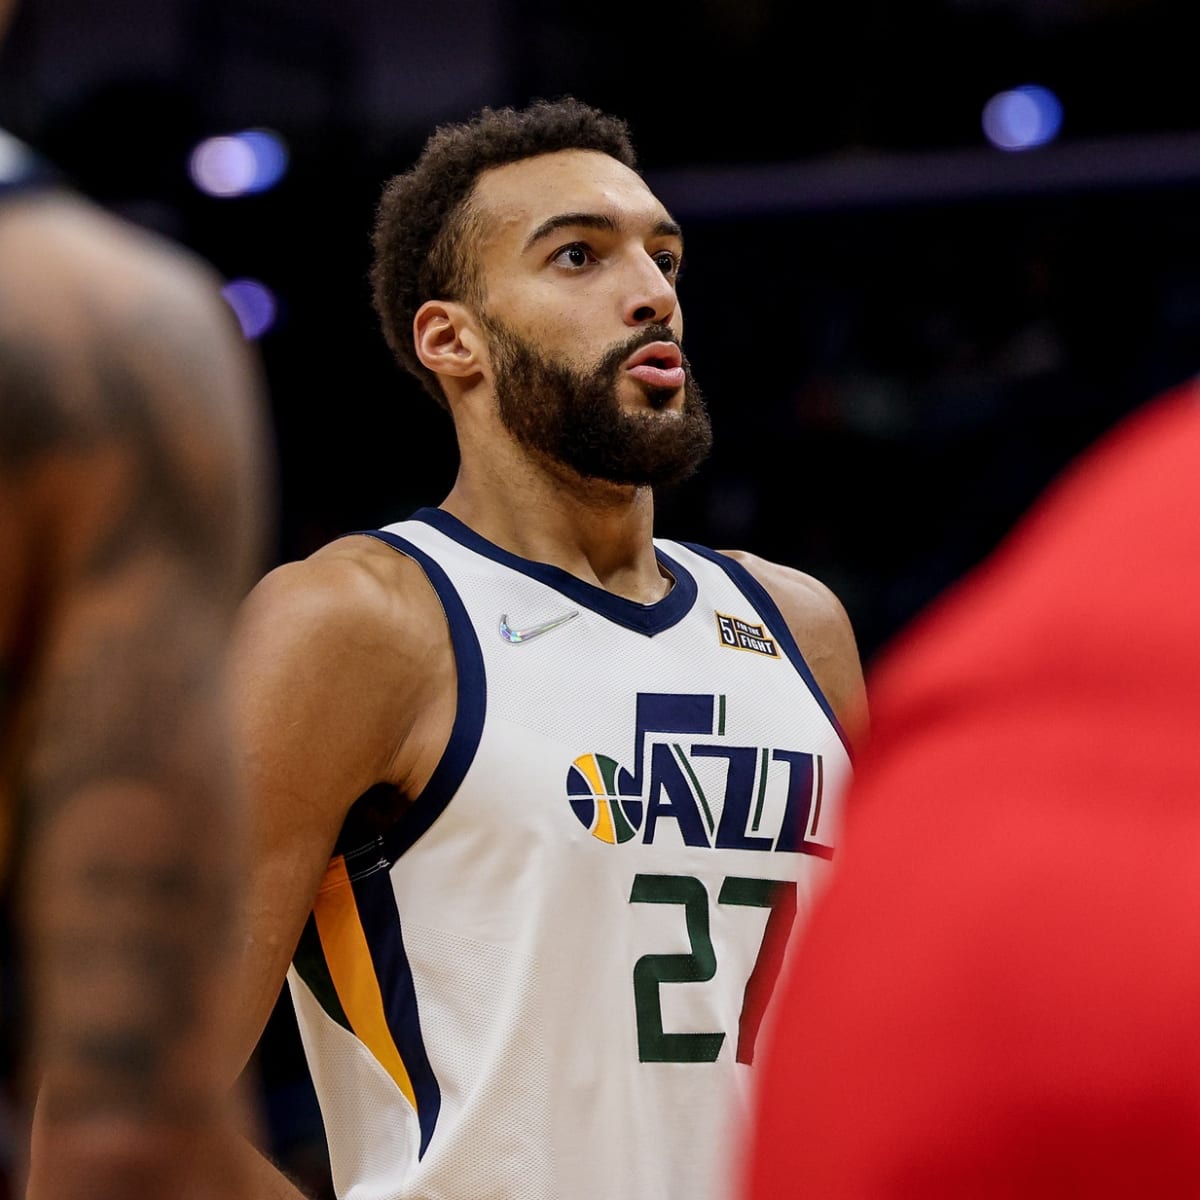 What should Utah Jazz fans be rooting for this season?